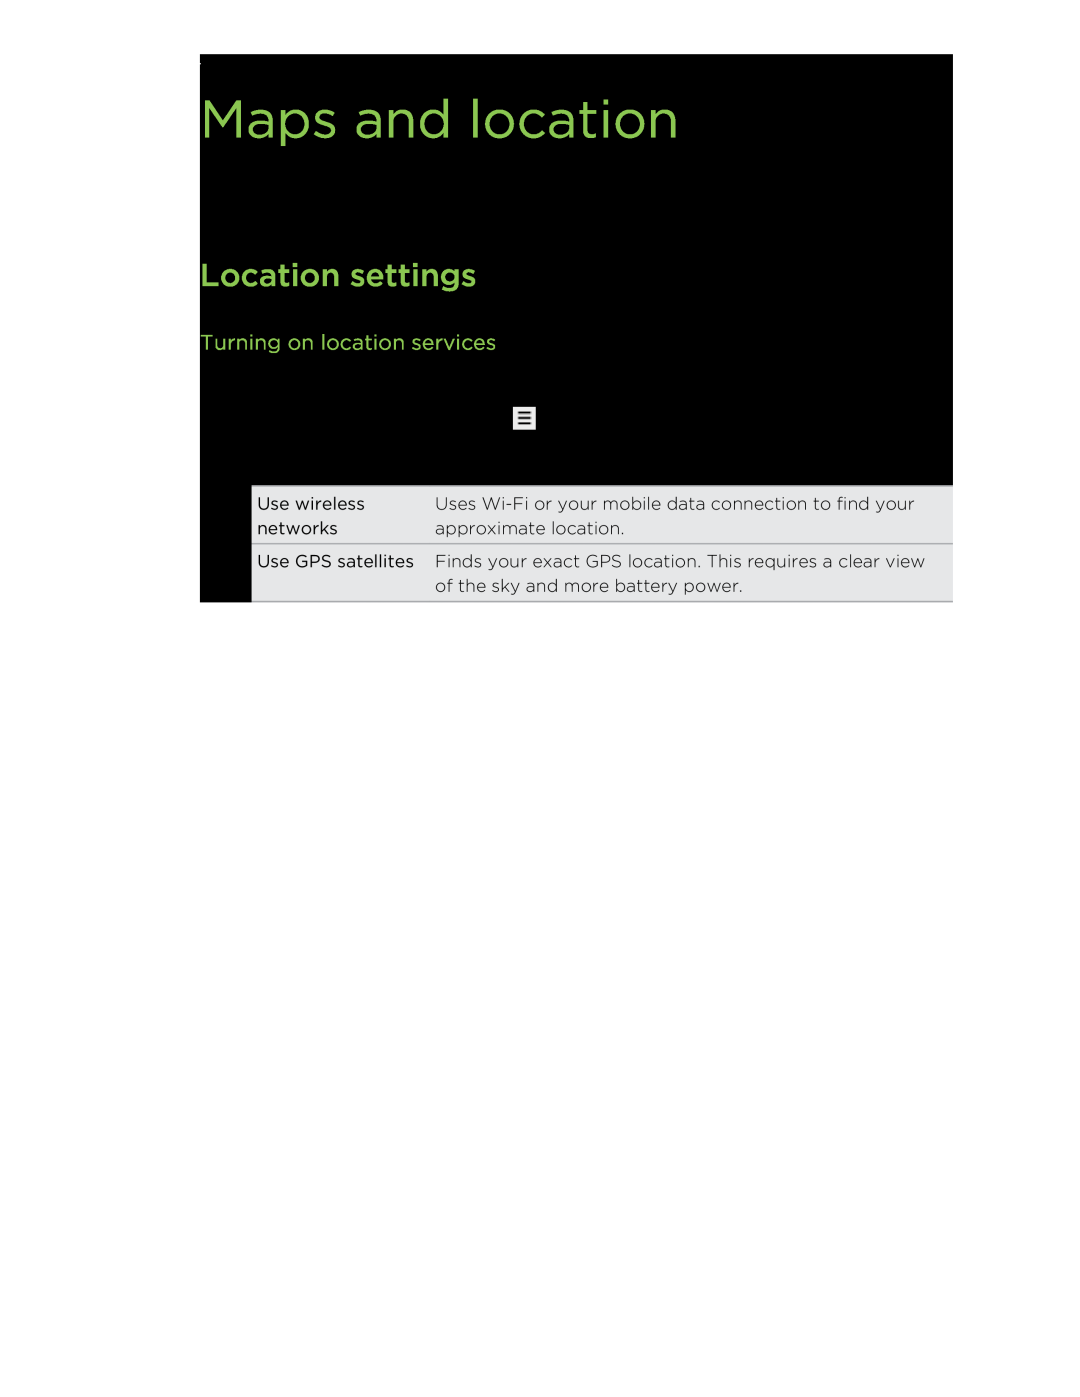 HTC S manual Maps and location, Location settings, Turning on location services 